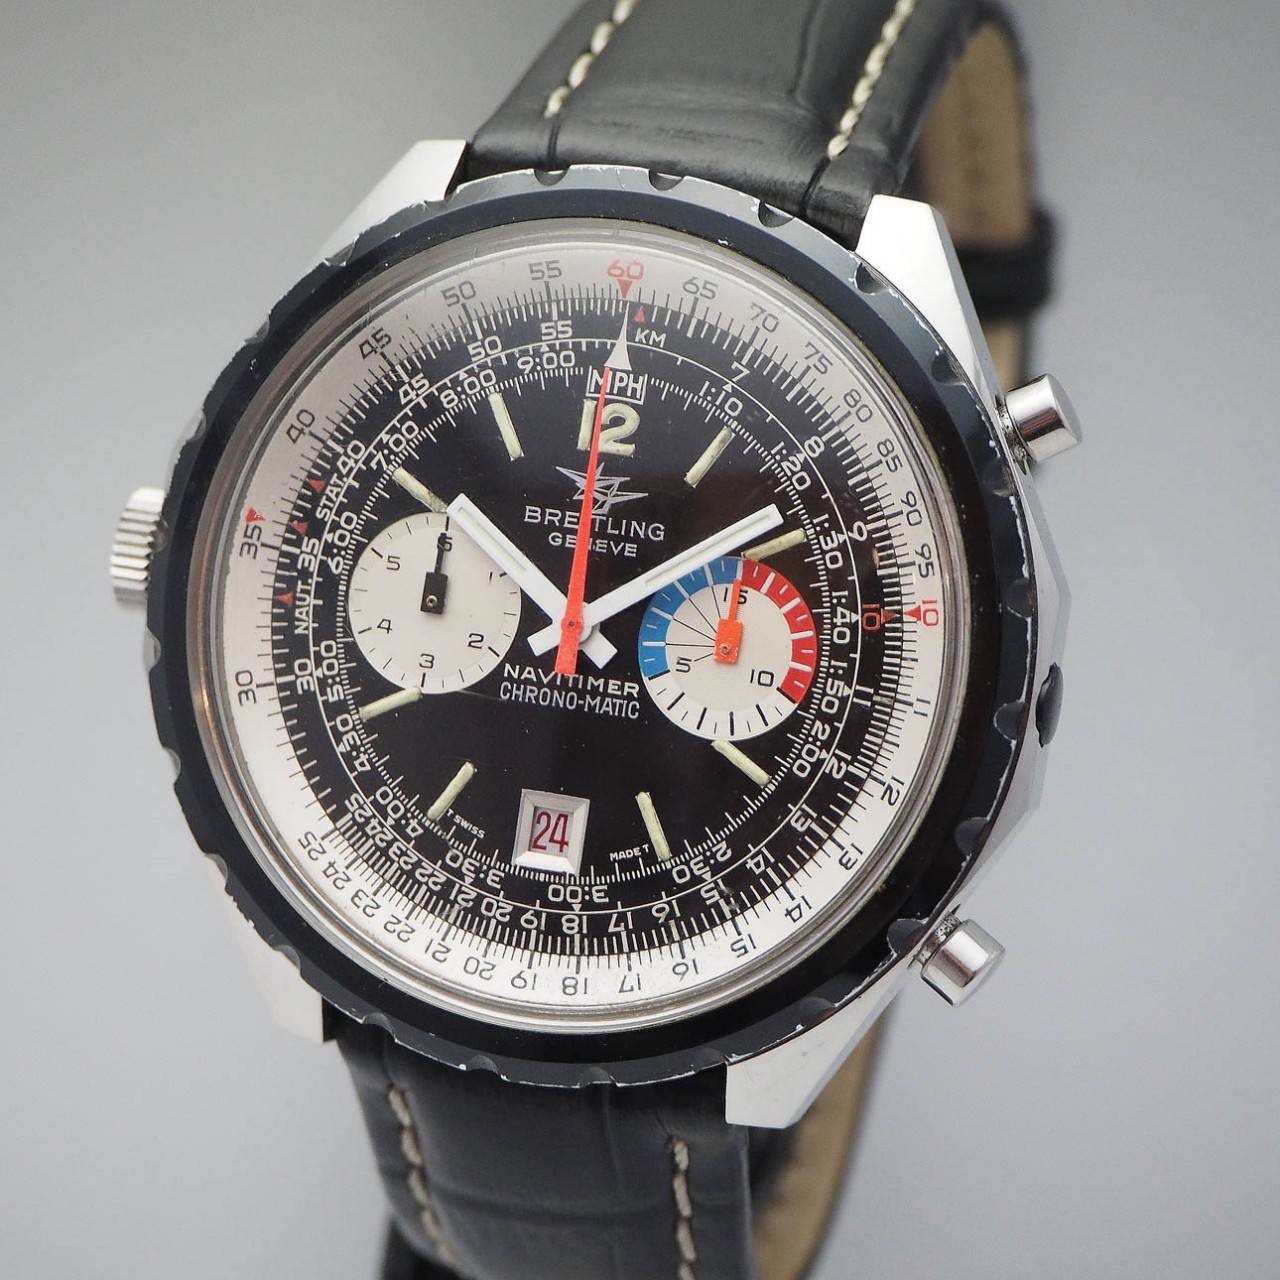 Breitling Navitimer Chrono-Matic 1806 &quot;Yachting&quot; Chronograph